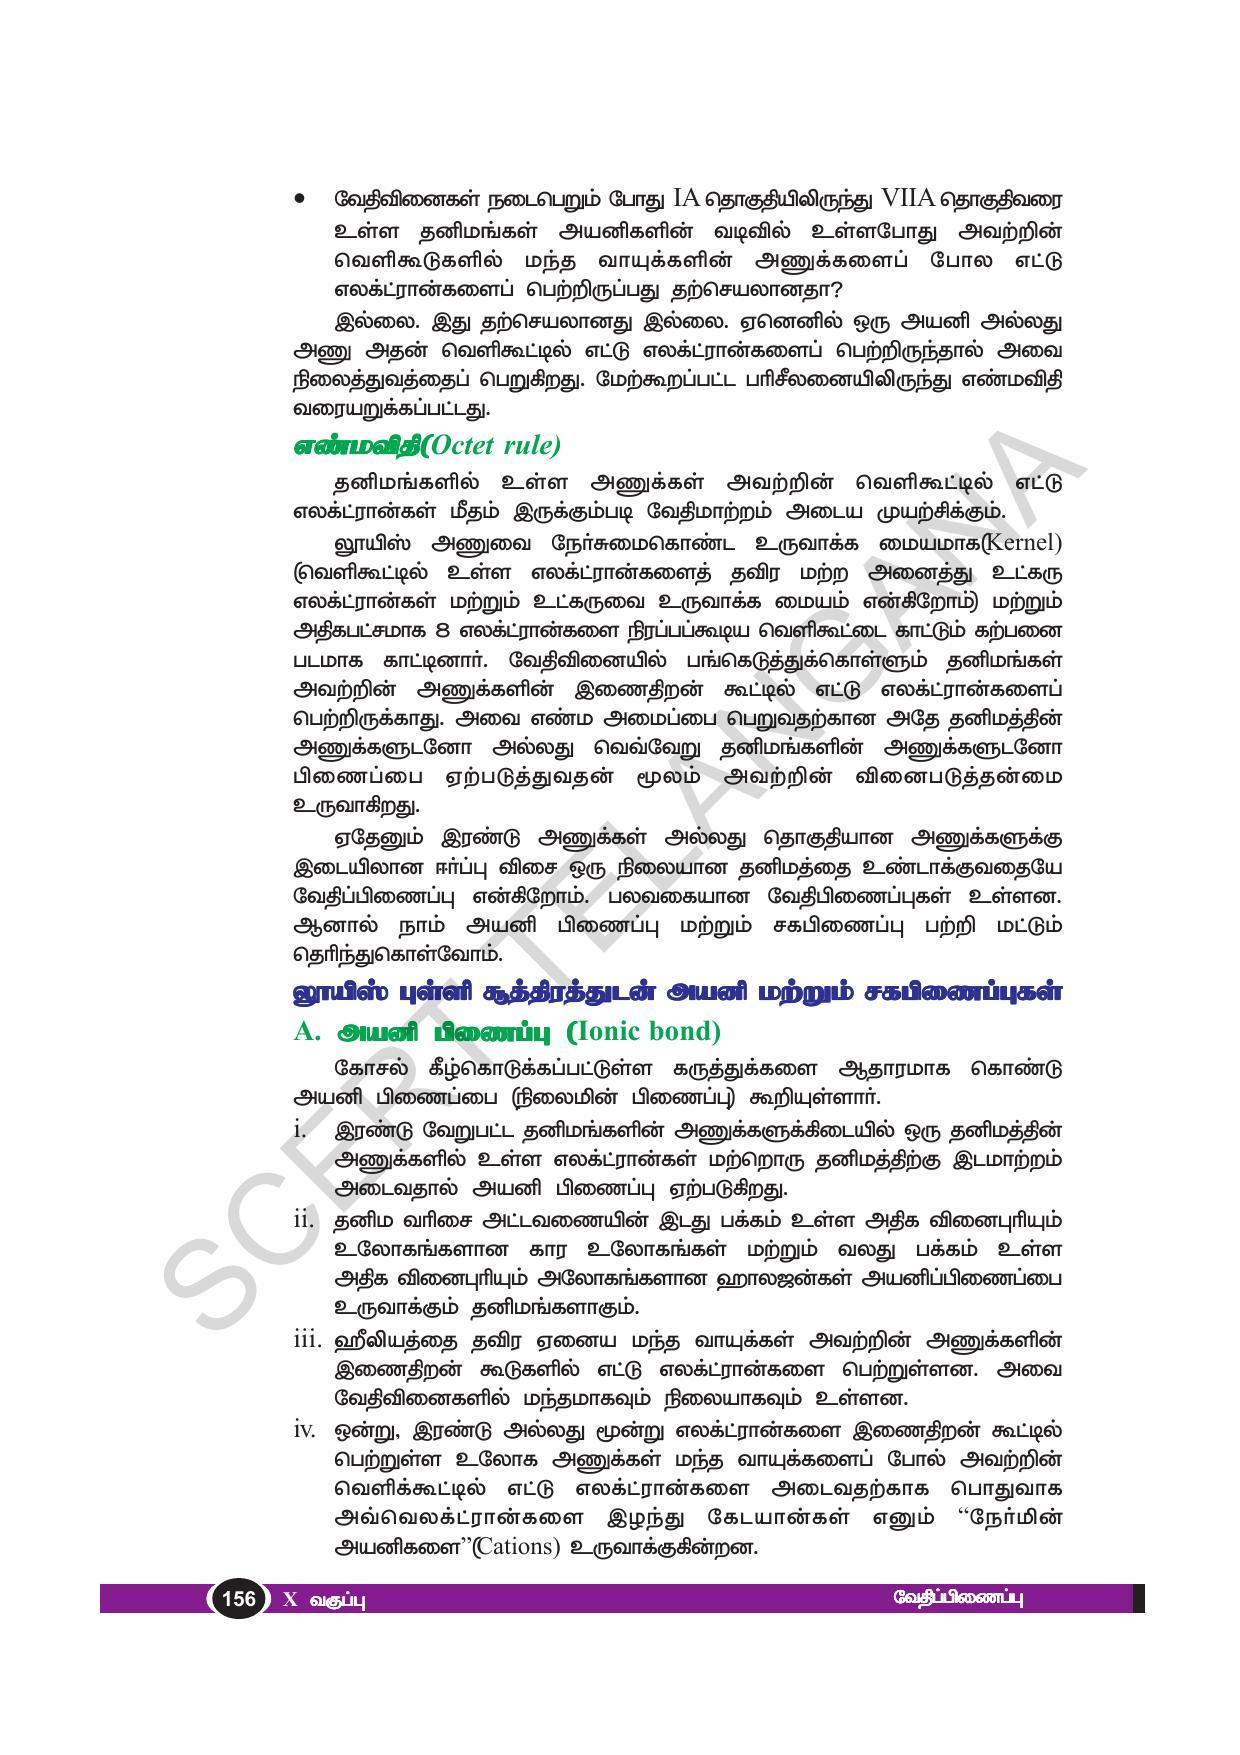 TS SCERT Class 10 Physical Science(Tamil Medium) Text Book - Page 168